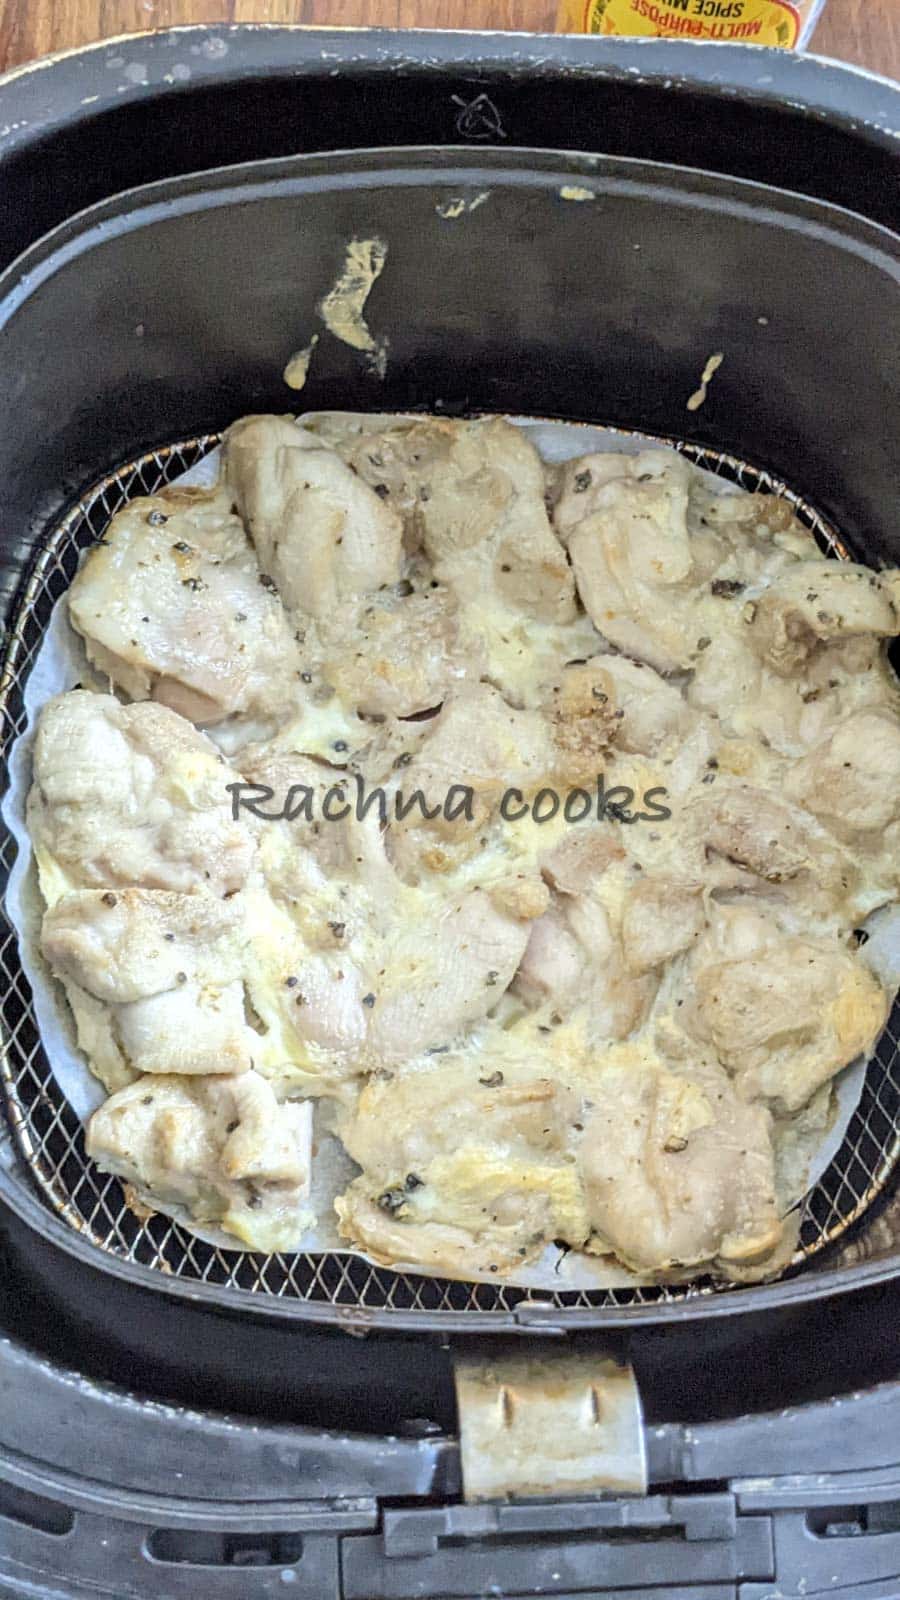 Chicken pieces after airfrying in air fryer basket.